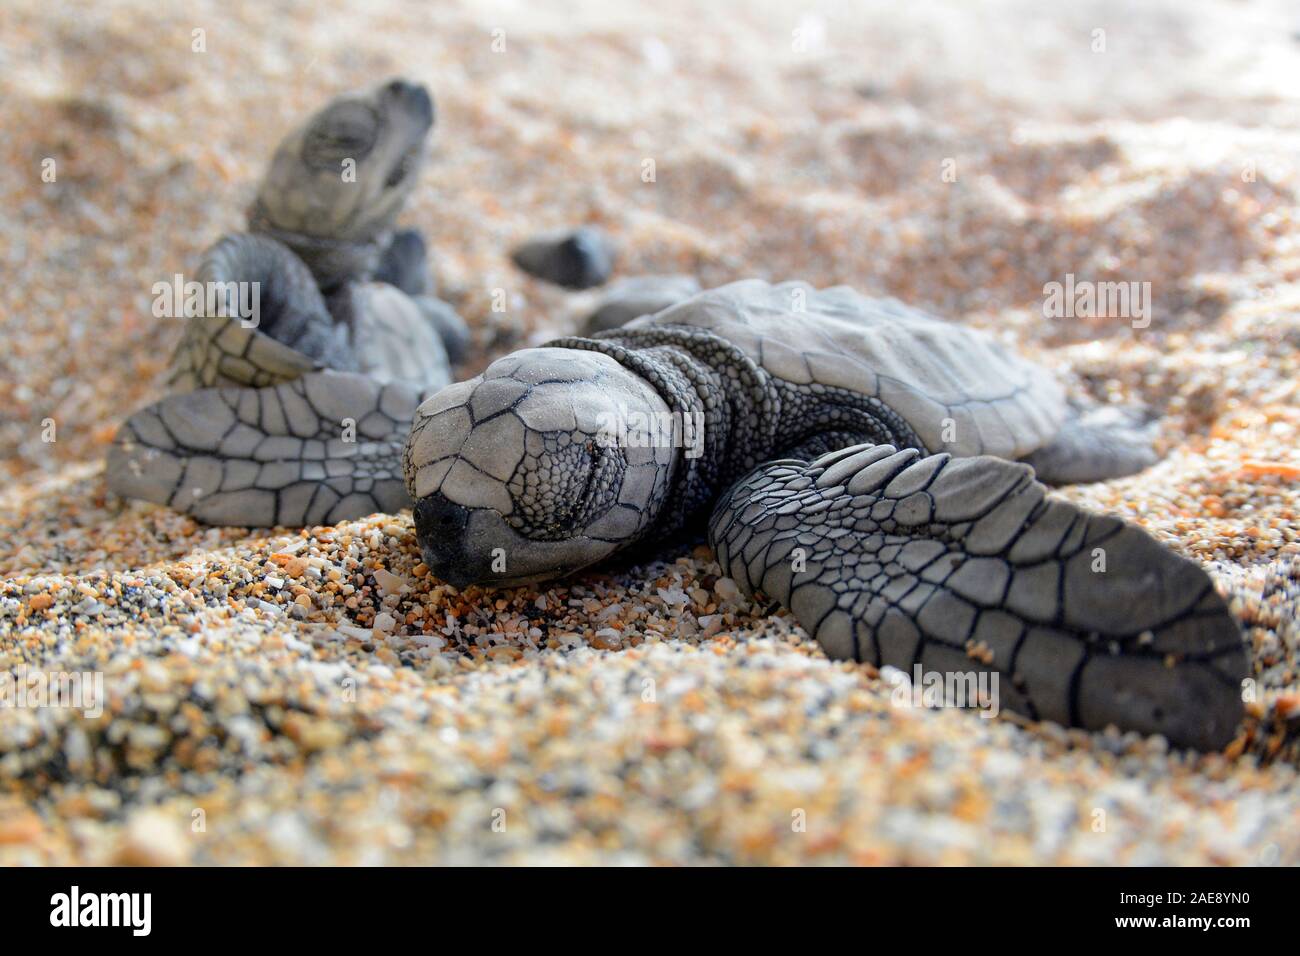 Green sea turtle, Chelonia mydas. Hatchling turtles struggle to reach the surface of the sand,  Bali, Indonesia. Stock Photo